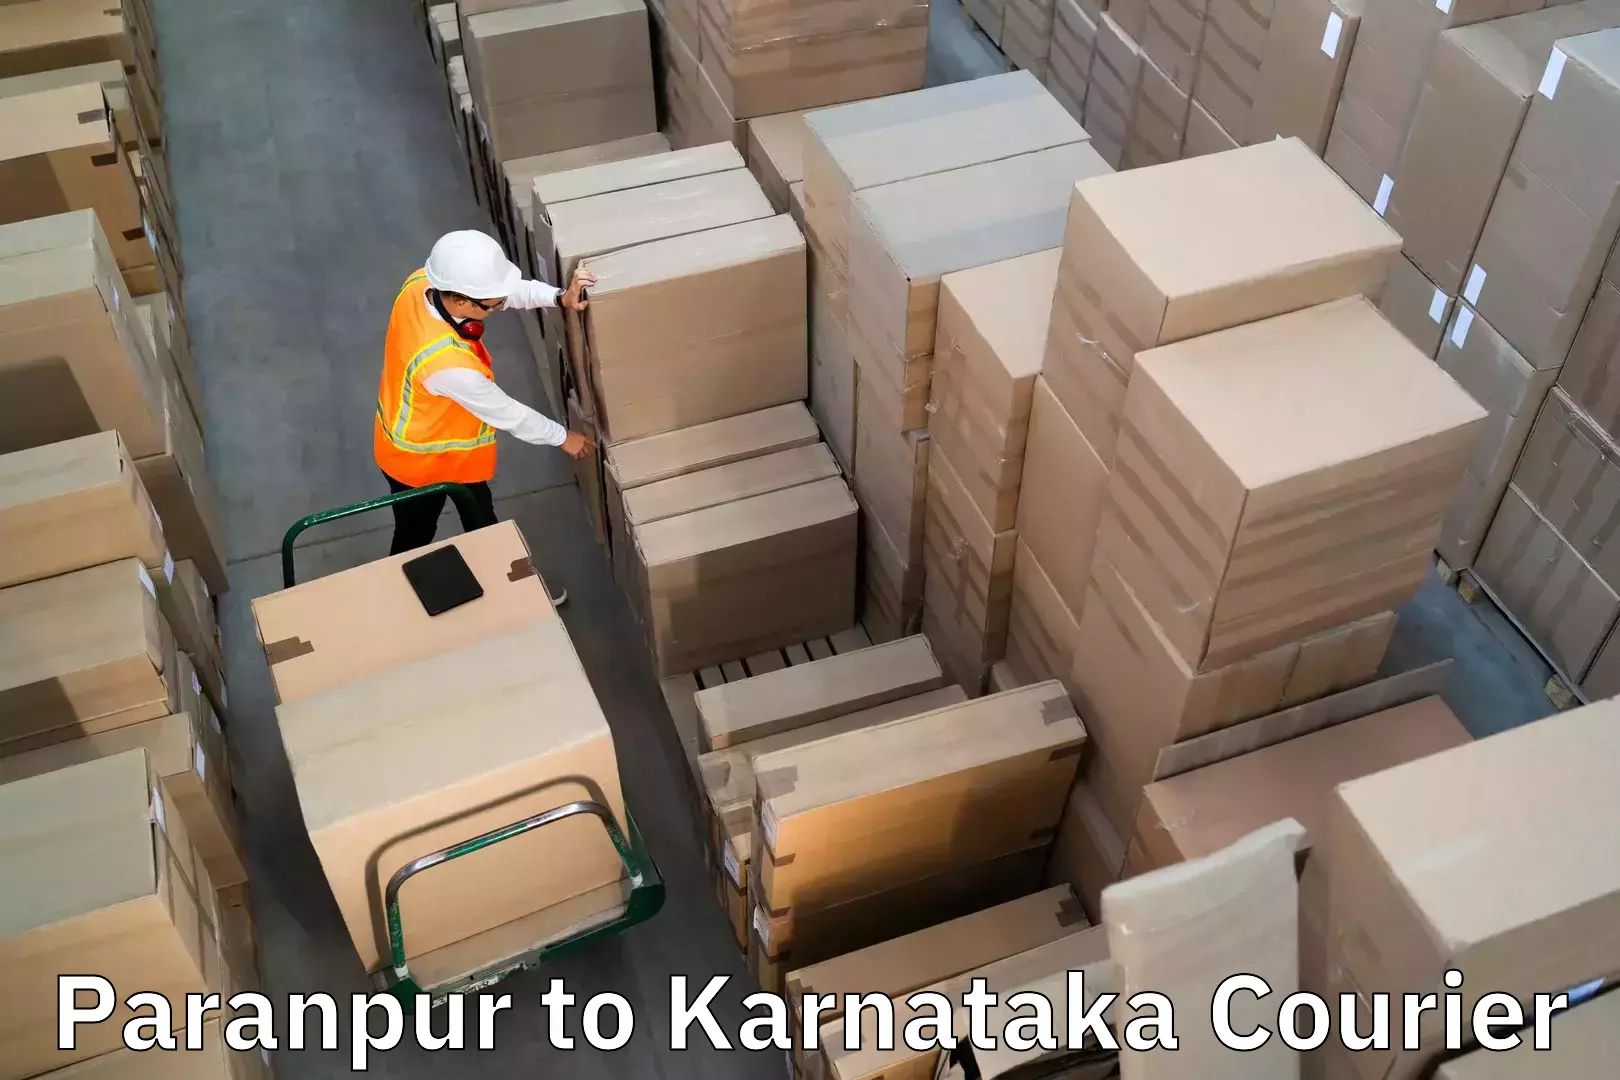 Baggage transport professionals Paranpur to Kittur